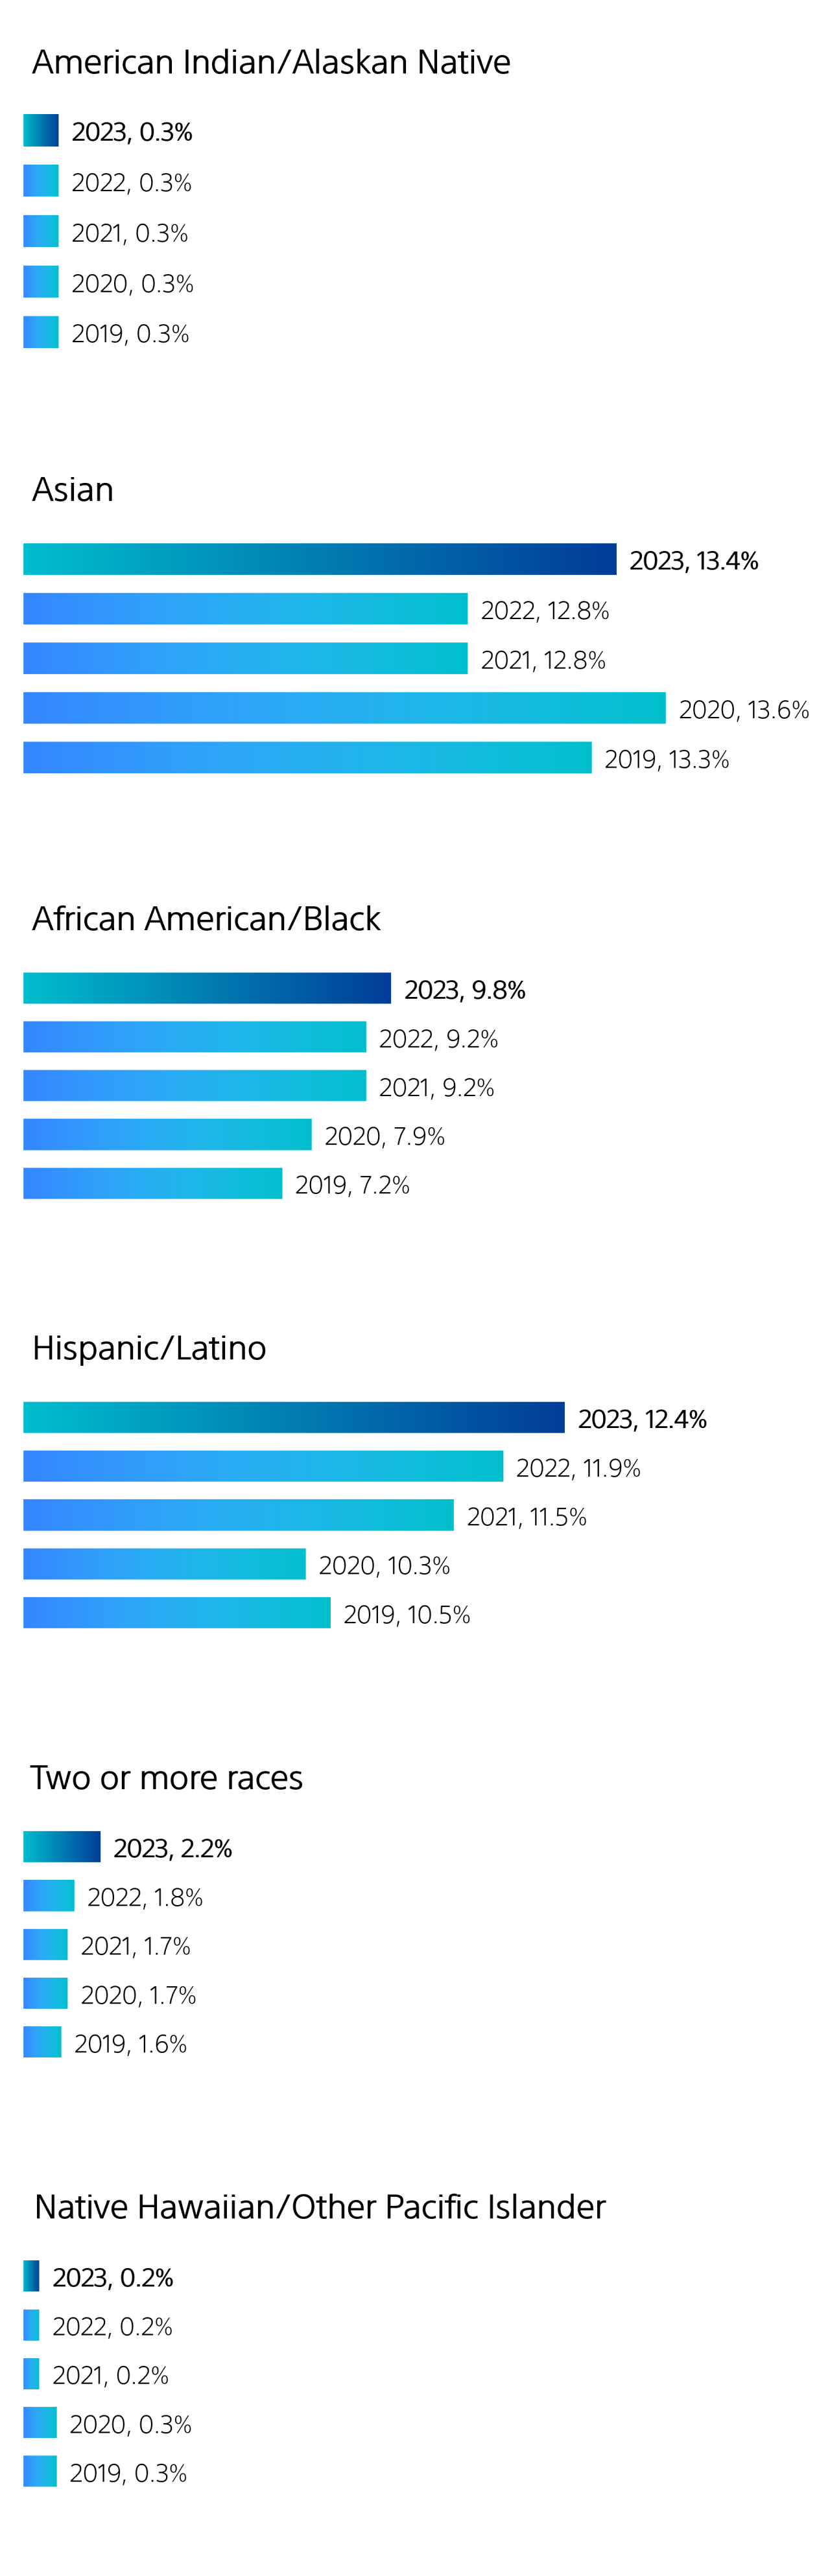 A bar graph showing the percentage of multicultural talent by ethnic group in the U.S./Puerto Rico: American Indian/Alaskan Native talent at Boston Scientific remained steady each year at 0.3% from 2019 to 2023. Asian talent fluctuated year to year from 13.3% in 2019 to 13.6%, 12.8%, stayed at 12.8% in 2022, before increasing to 13.4% in 2023. African American/Black talent increased from 7.2% in 2019 to 7.9%, 9.2%, stayed at 9.2% in 2022, before increasing to 9.8% in 2023. Hispanic/Latino talent decreased from 10.5% in 2019 to 10.3% in 2020, then increased each year to 11.5%, 11.9% and 12.4% in 2023. Talent identifying as two or more races increased from 1.6% in 2019 to 1.7%, stayed at 1.7% in 2021, then increased to 1.8% and 2.2% in 2023. Native Hawaiian/other Pacific Islander talent remained steady at 0.3% in 2019 and 2020, then remained steady at 0.2% from 2021 to 2023.